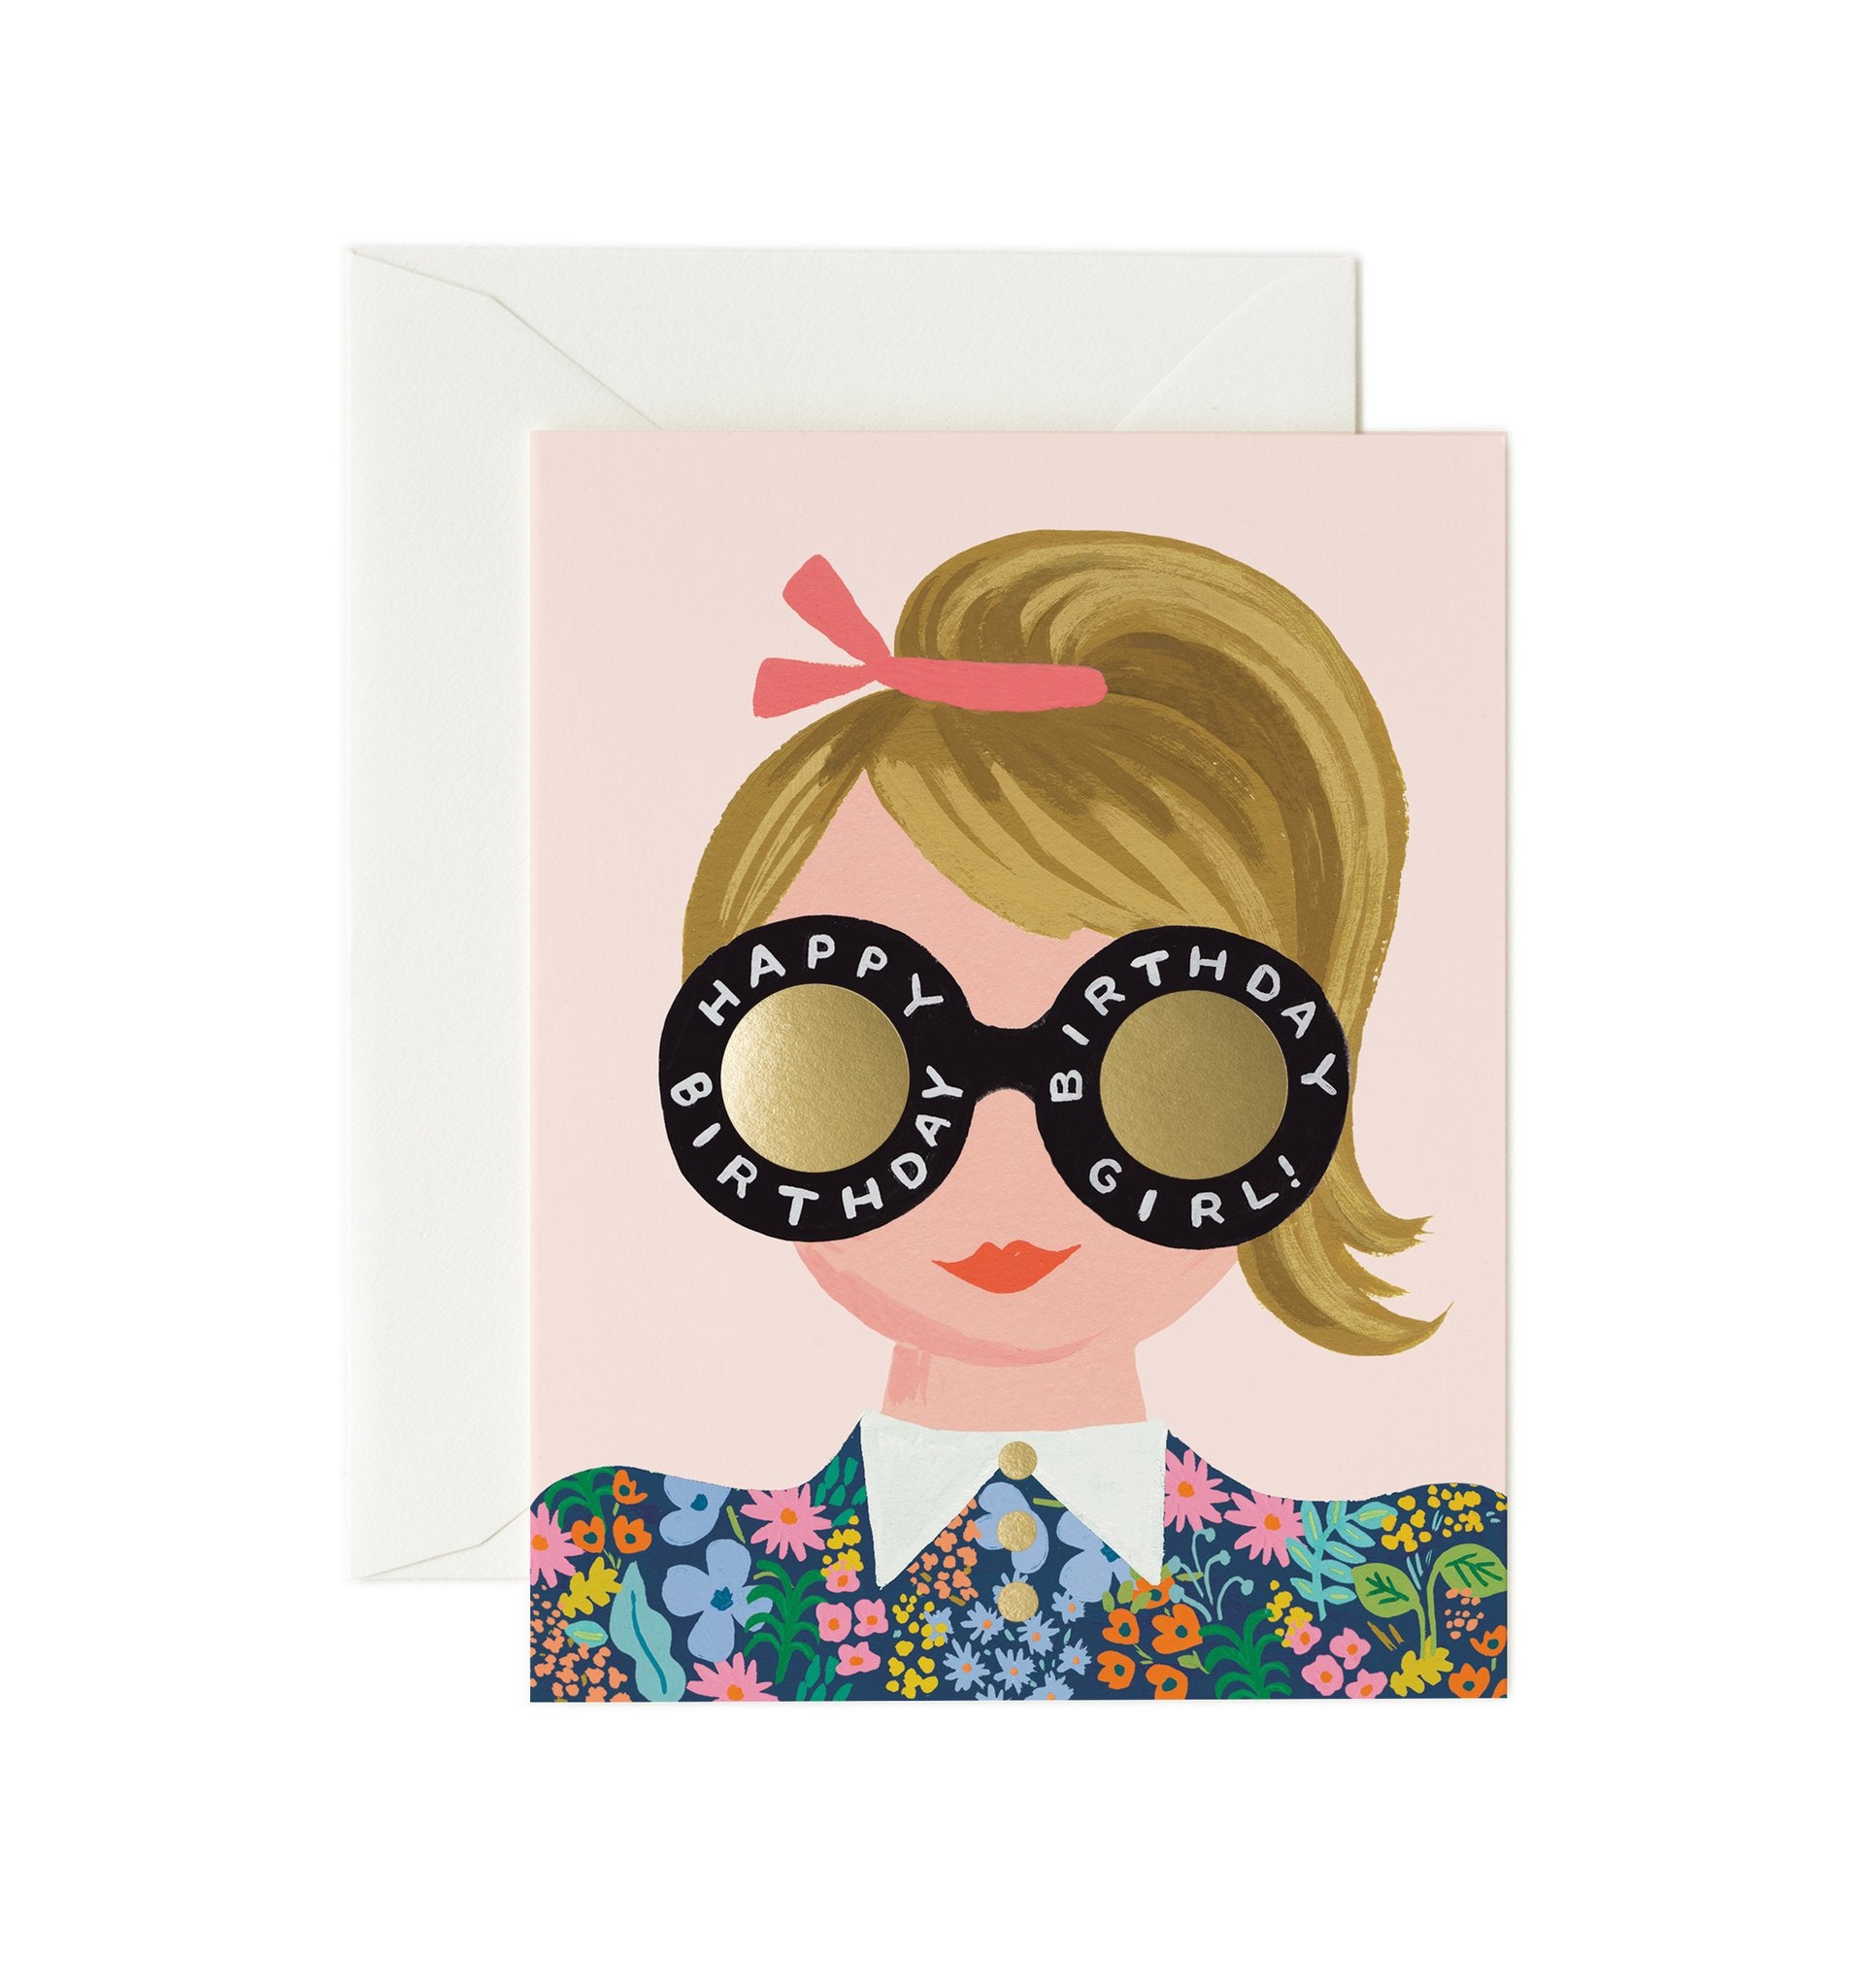 Meadow Birthday Girl by Rifle Cards